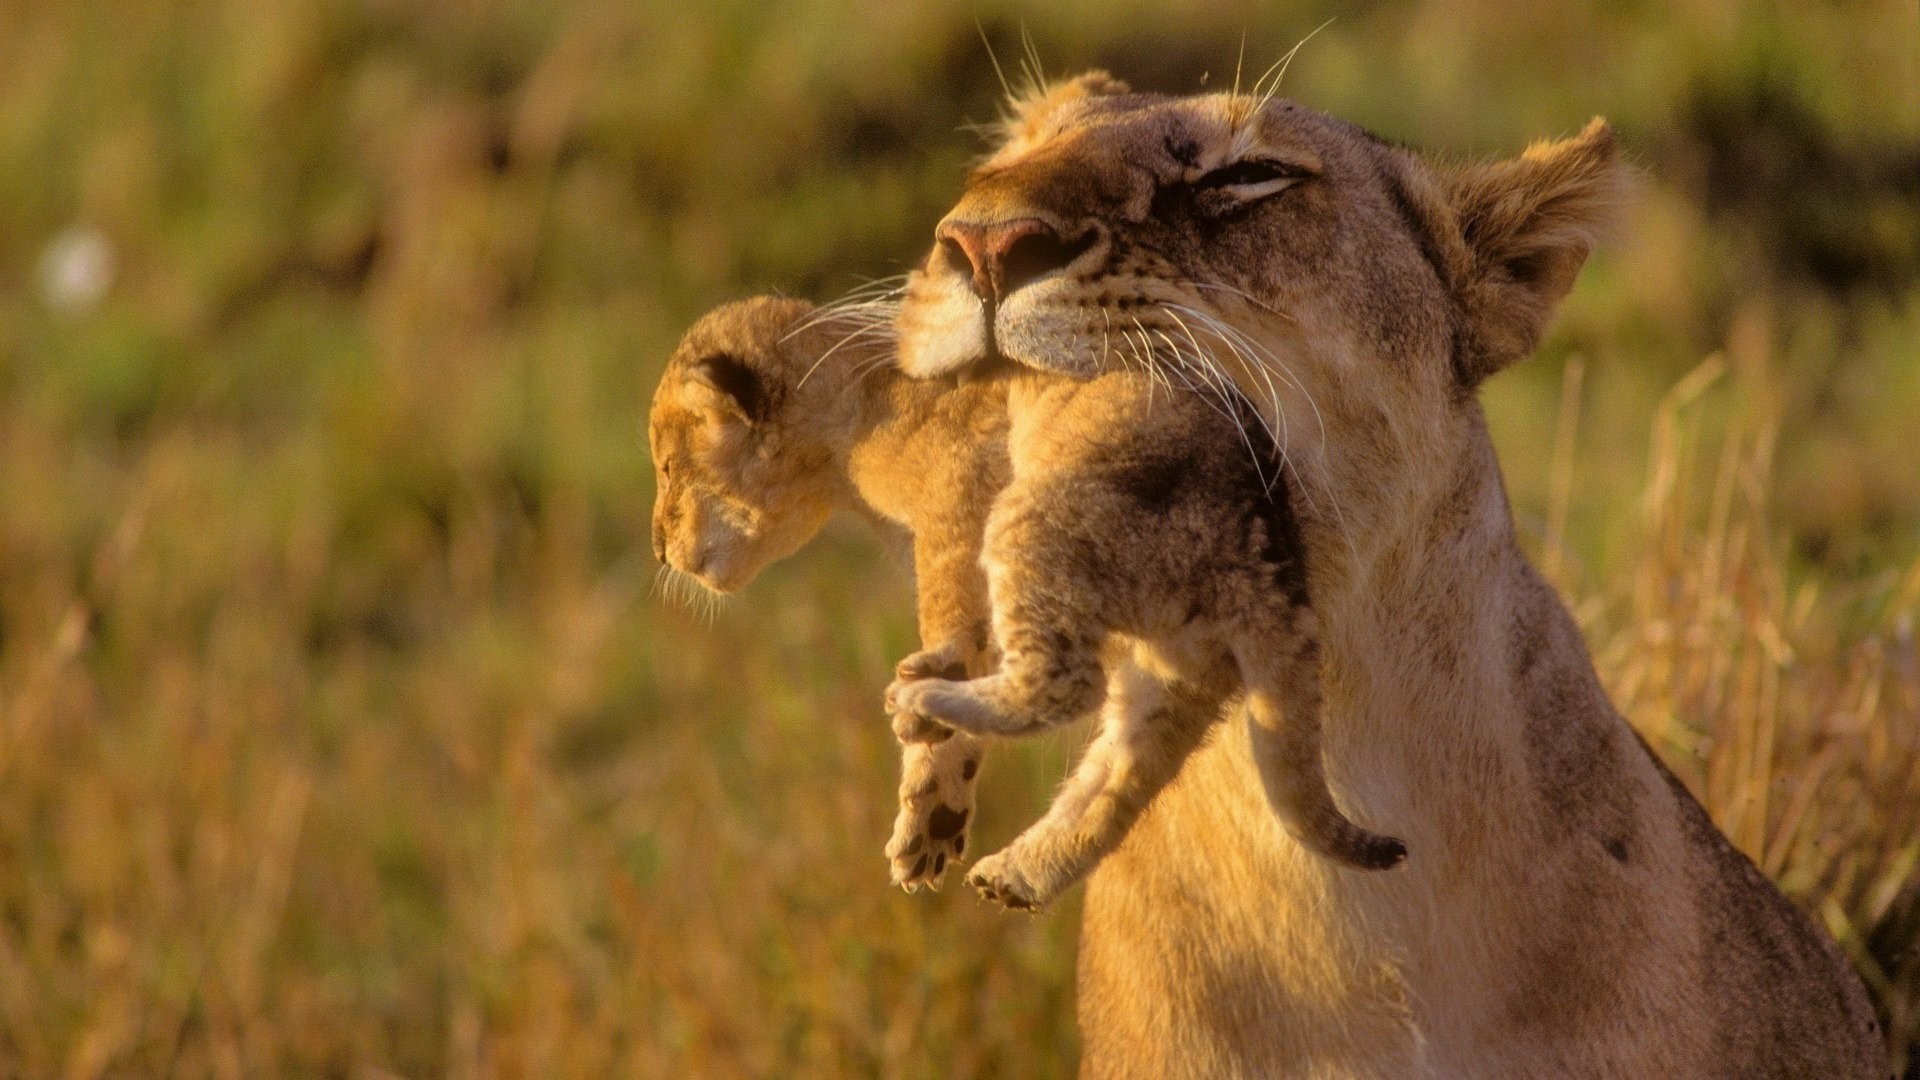 Animals Cubs Africa Lions Baby Wallpaper HD